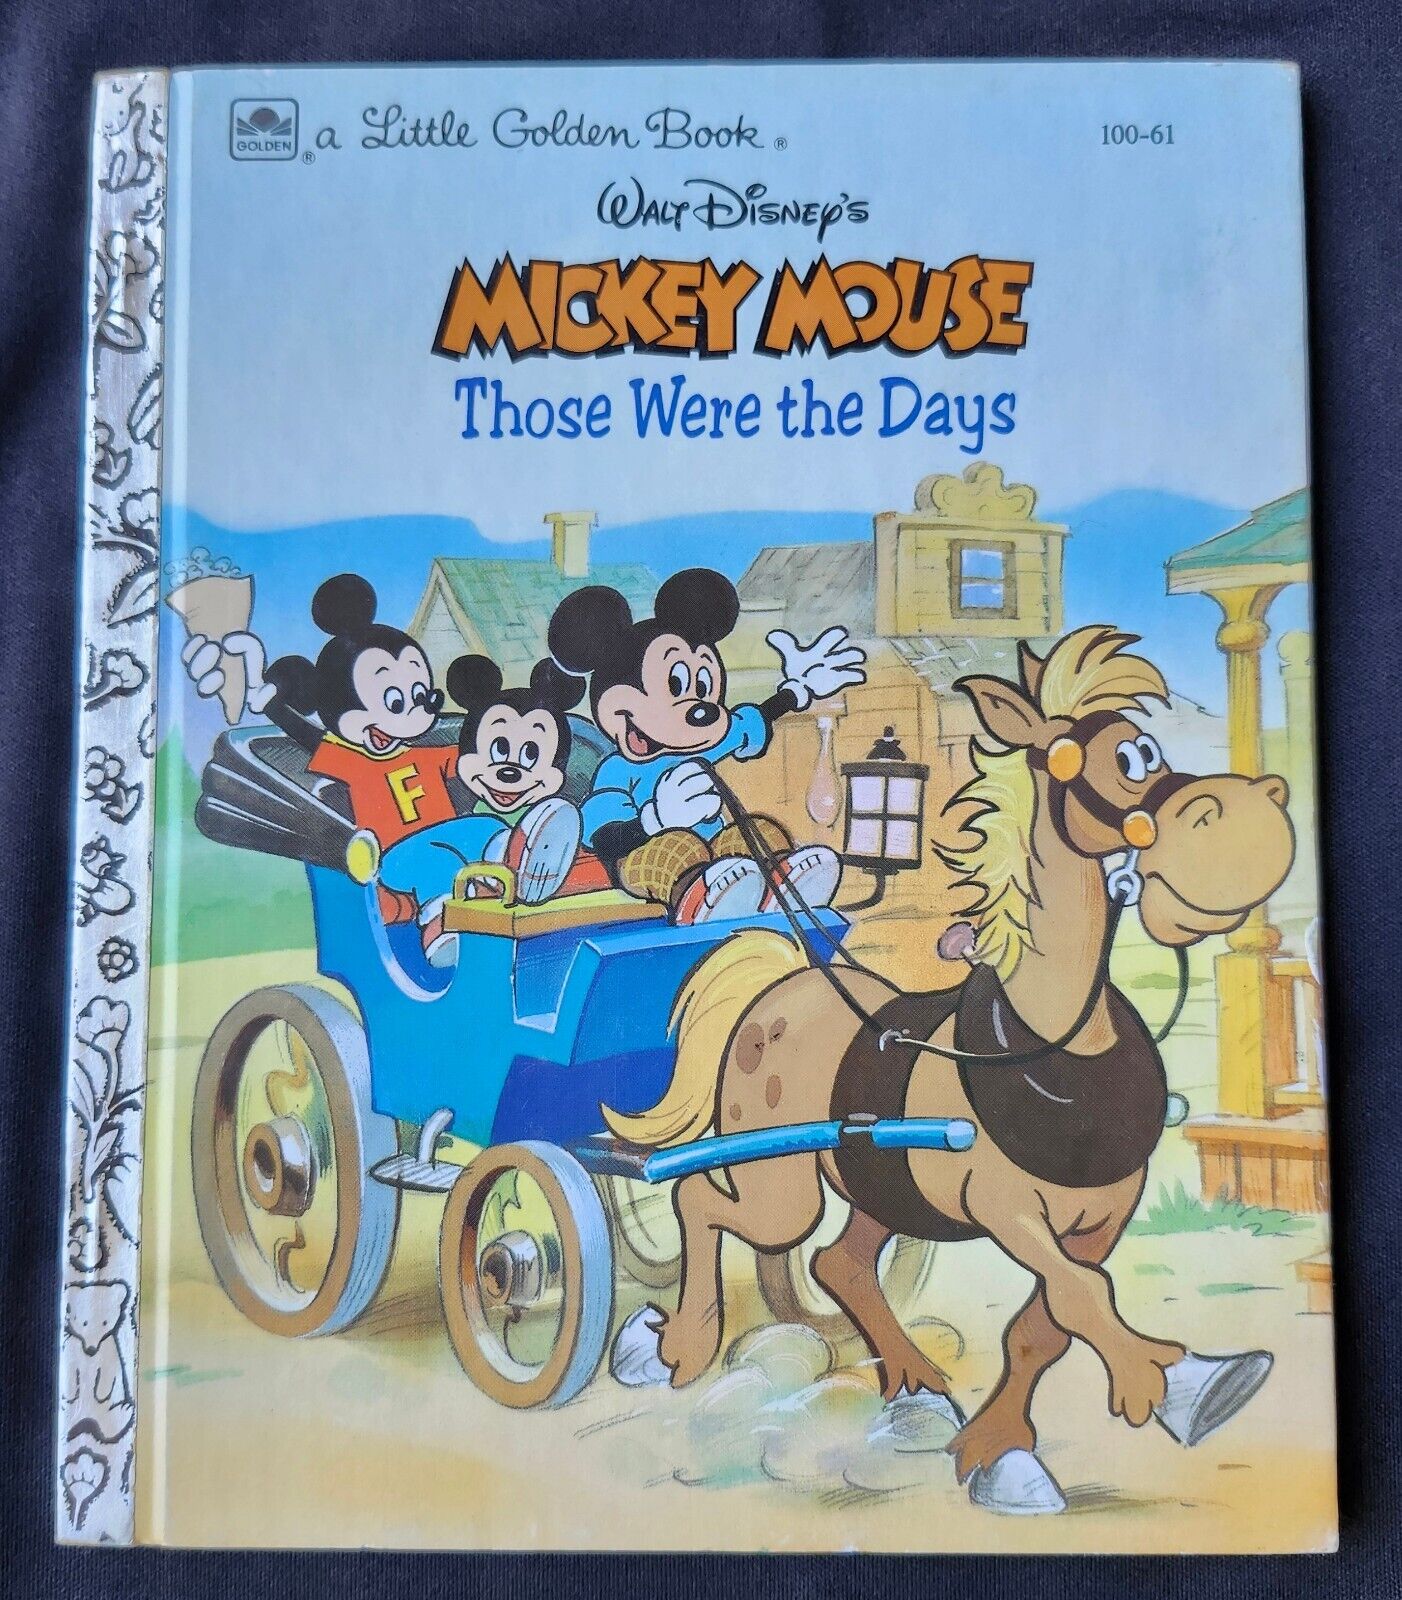 Vintage Little Golden Book Walt Disney Mickey Mouse Those Were the Days